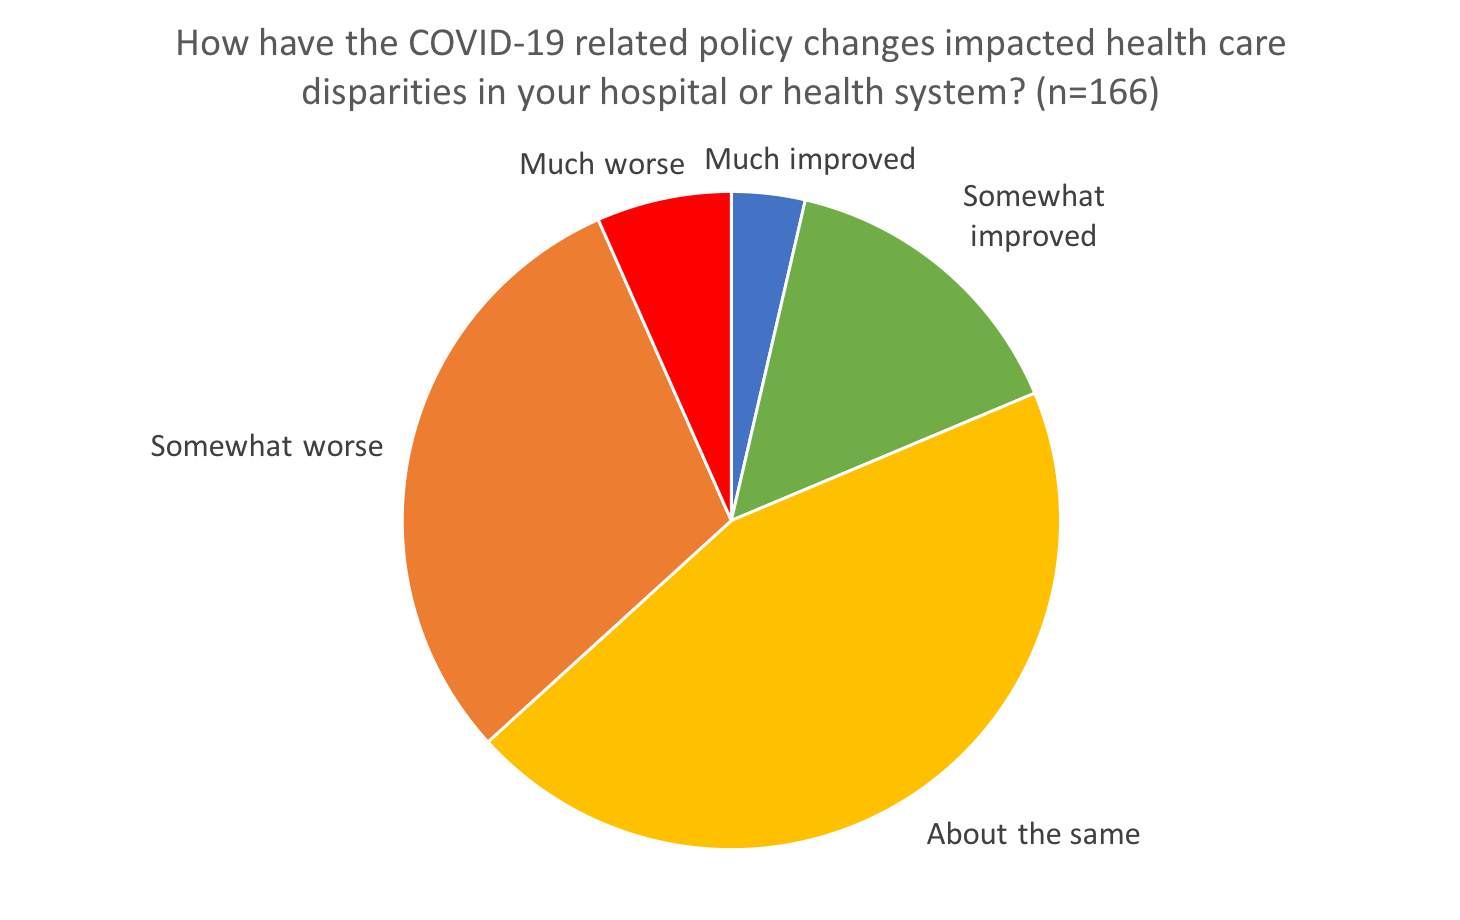 How have the COVID-19 related policy changes impacted health care disparities in your hospital or health system?